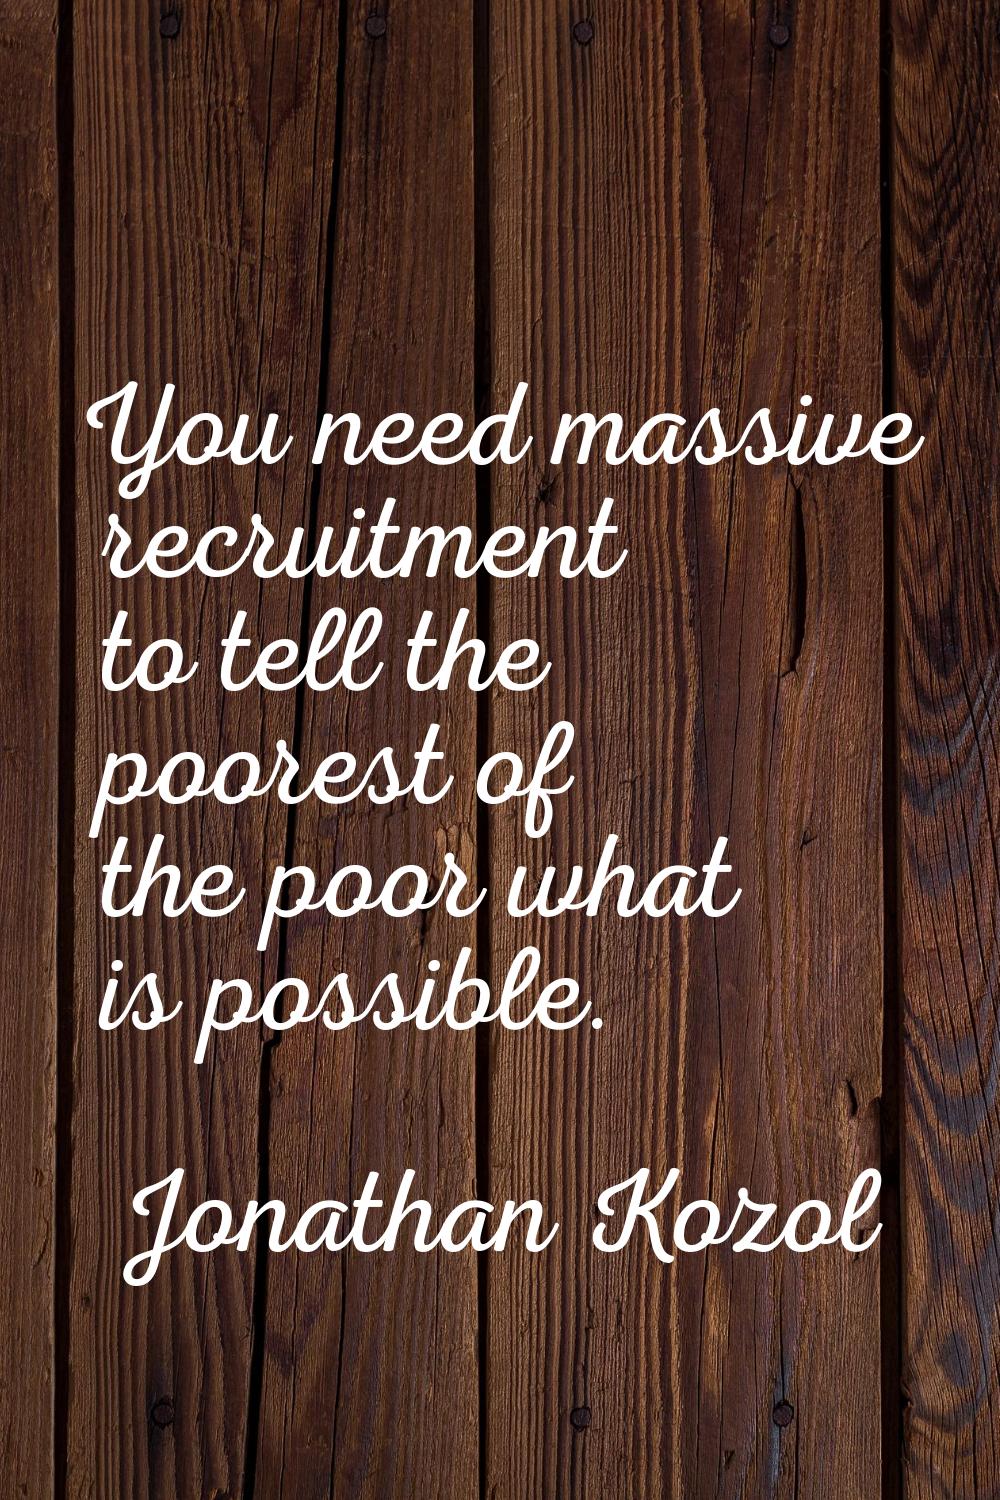 You need massive recruitment to tell the poorest of the poor what is possible.